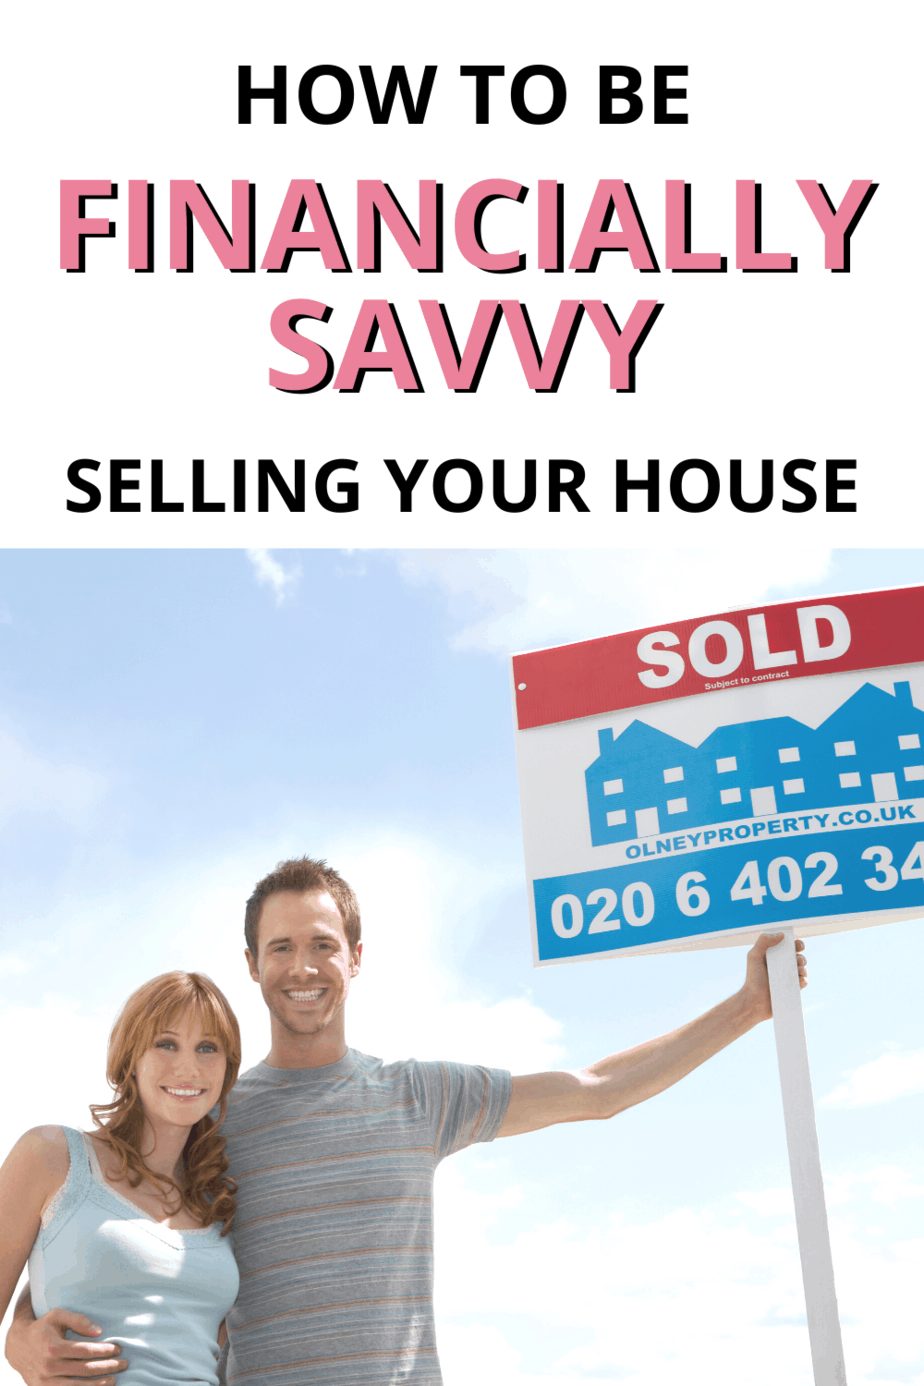 How to be financially savvy selling your house